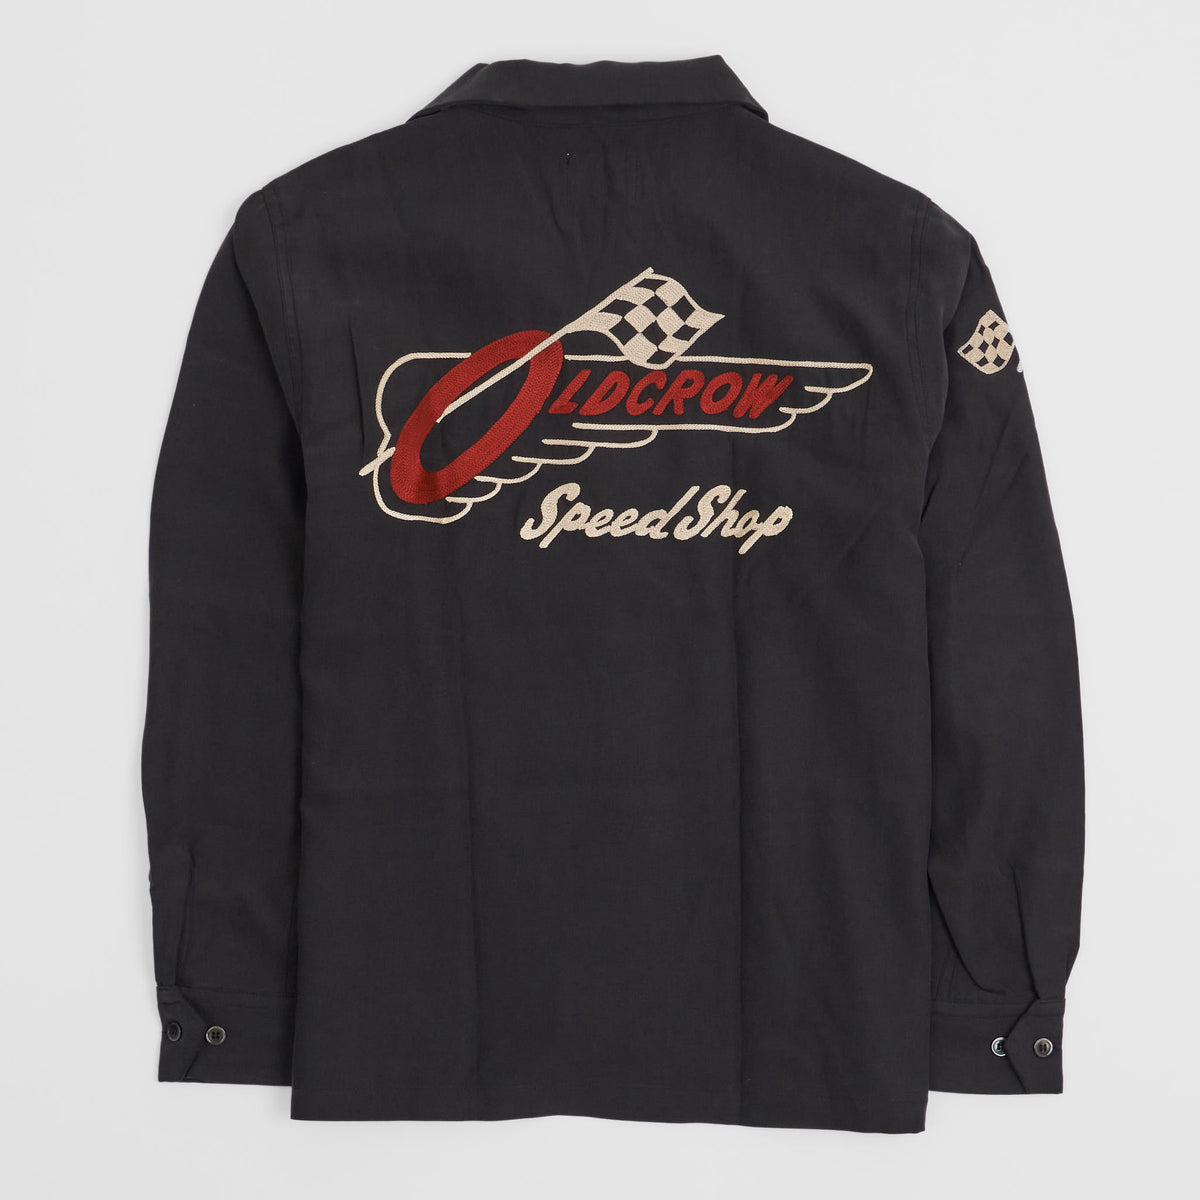 Old Crow Speed Shop by Glad Hand &amp; Co. Hot Rod Garage Shirt